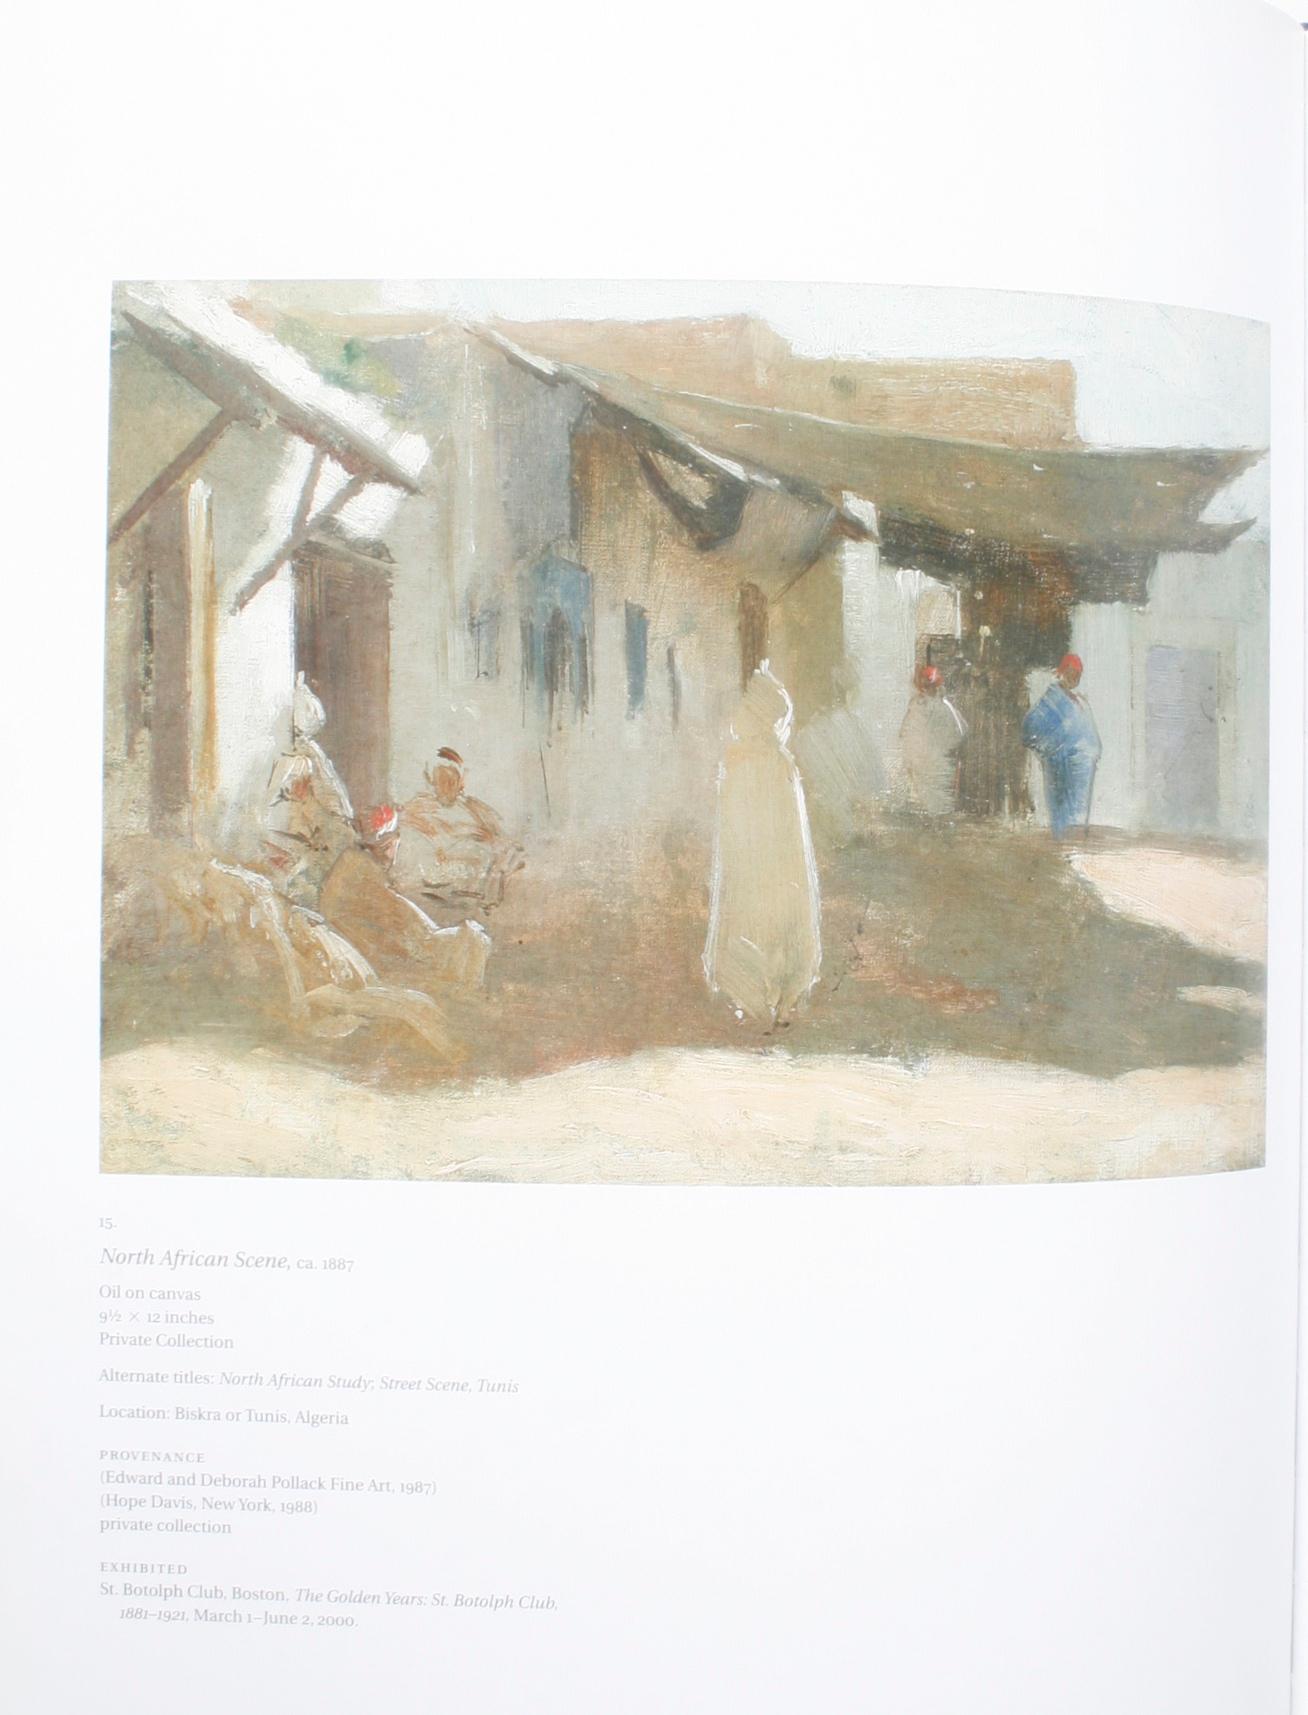 Willard Metcalf, Yankee Impressionist. New York: Spanierman Gallery, LLC, 2003. 1st Ed hardcover with no dust jacket as issued. 151 pp. Exhibition catalogue on the work of Willard Metcalf held at Spanierman Gallery from May 8 – June 28, 2003.